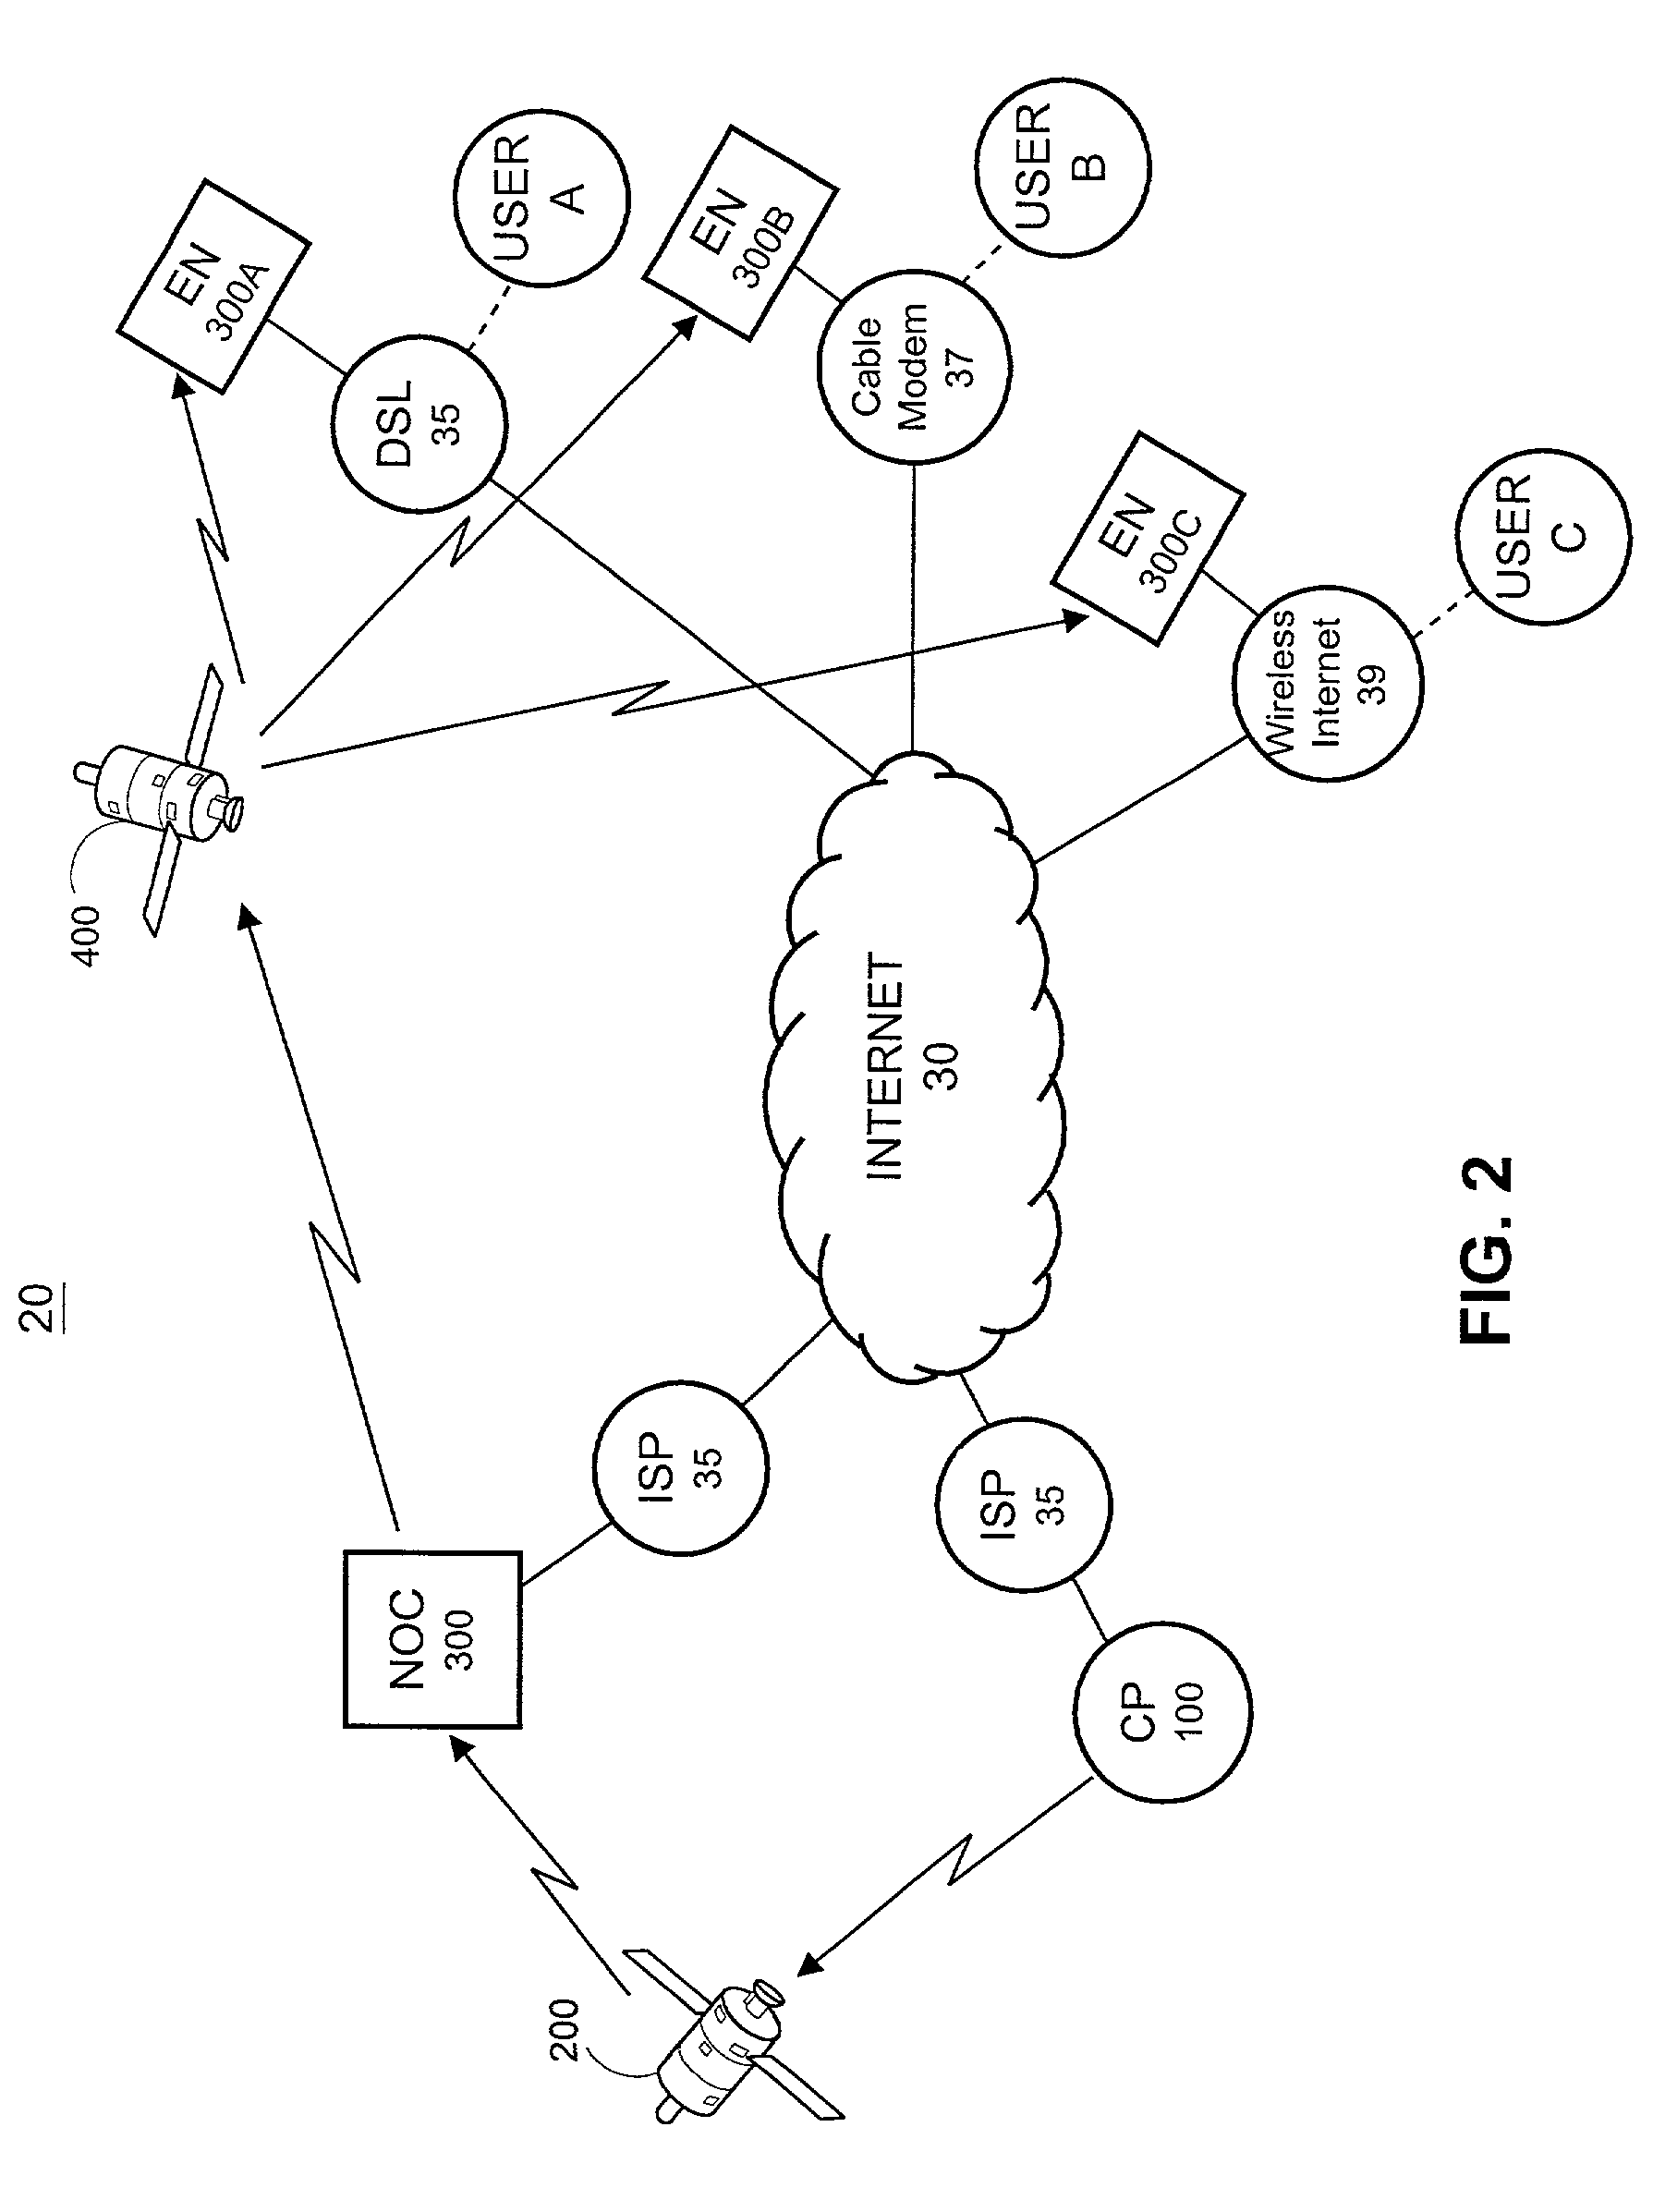 Forward cache management between edge nodes in a satellite based content delivery system